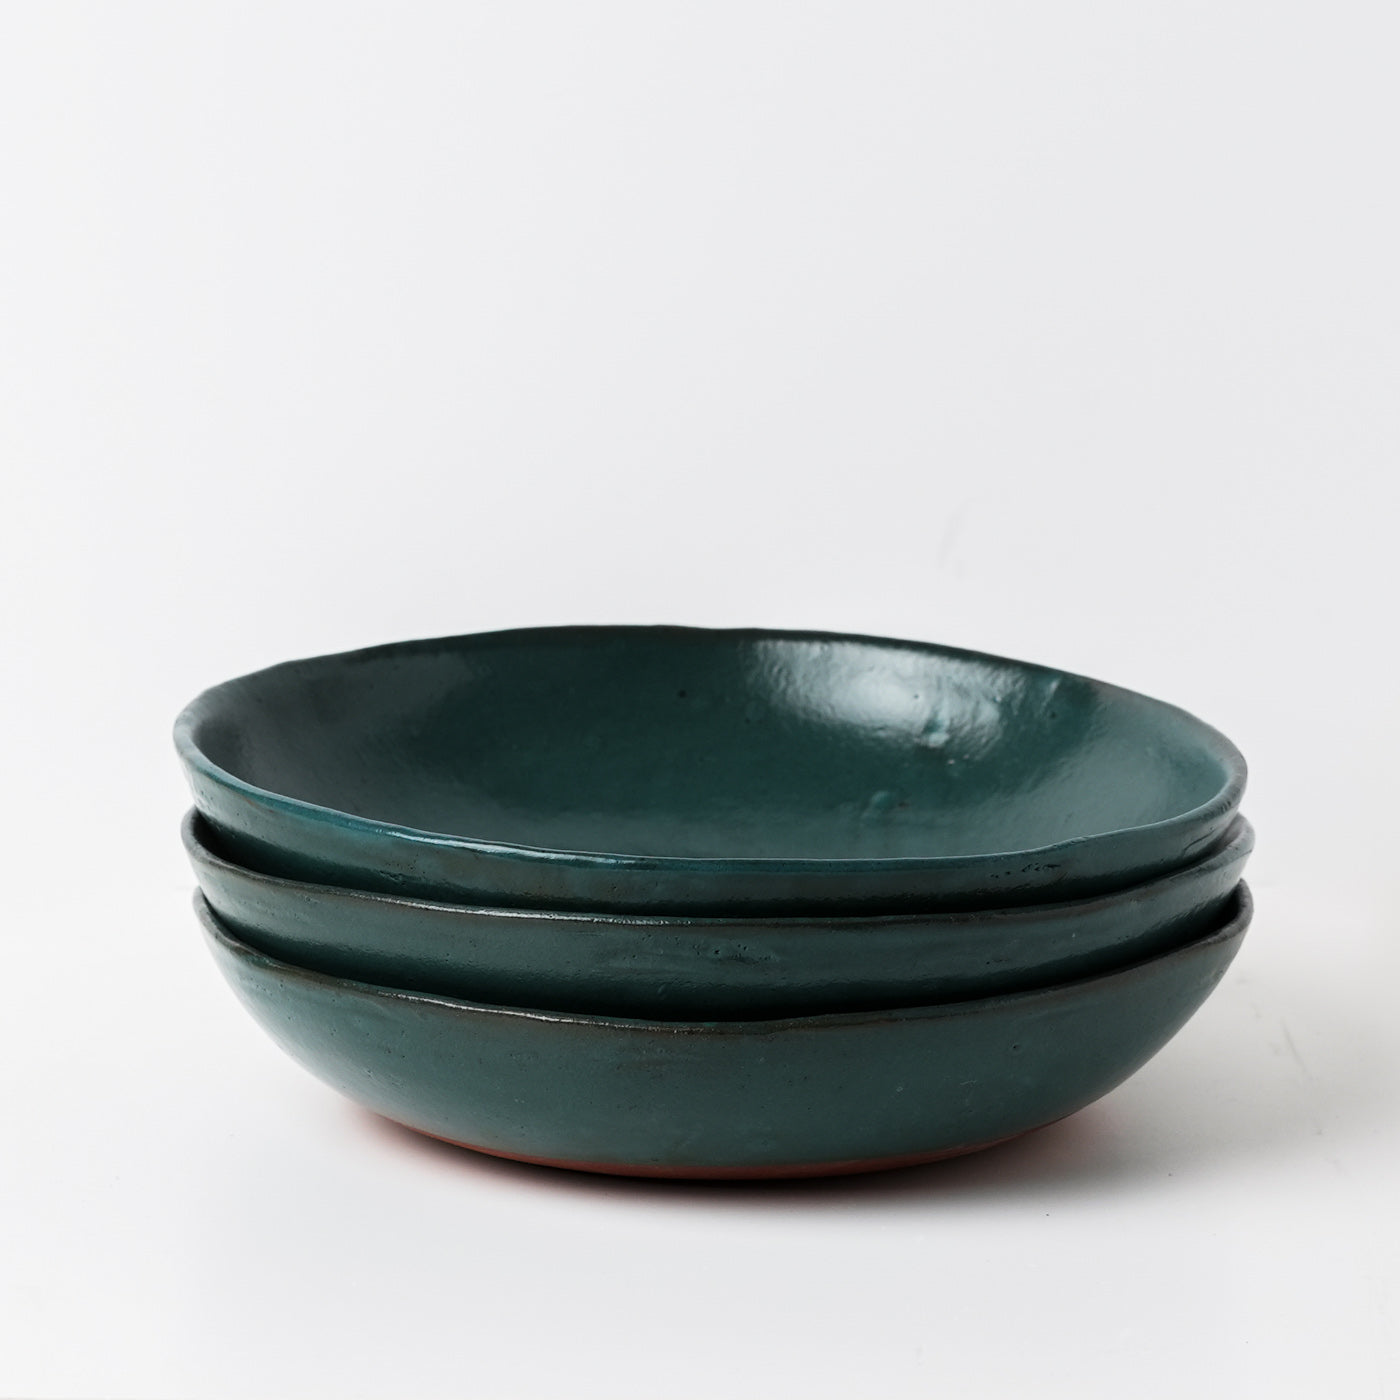 Emerald green hand thrown ceramic pasta bowl by Gaëlle Le Doledec